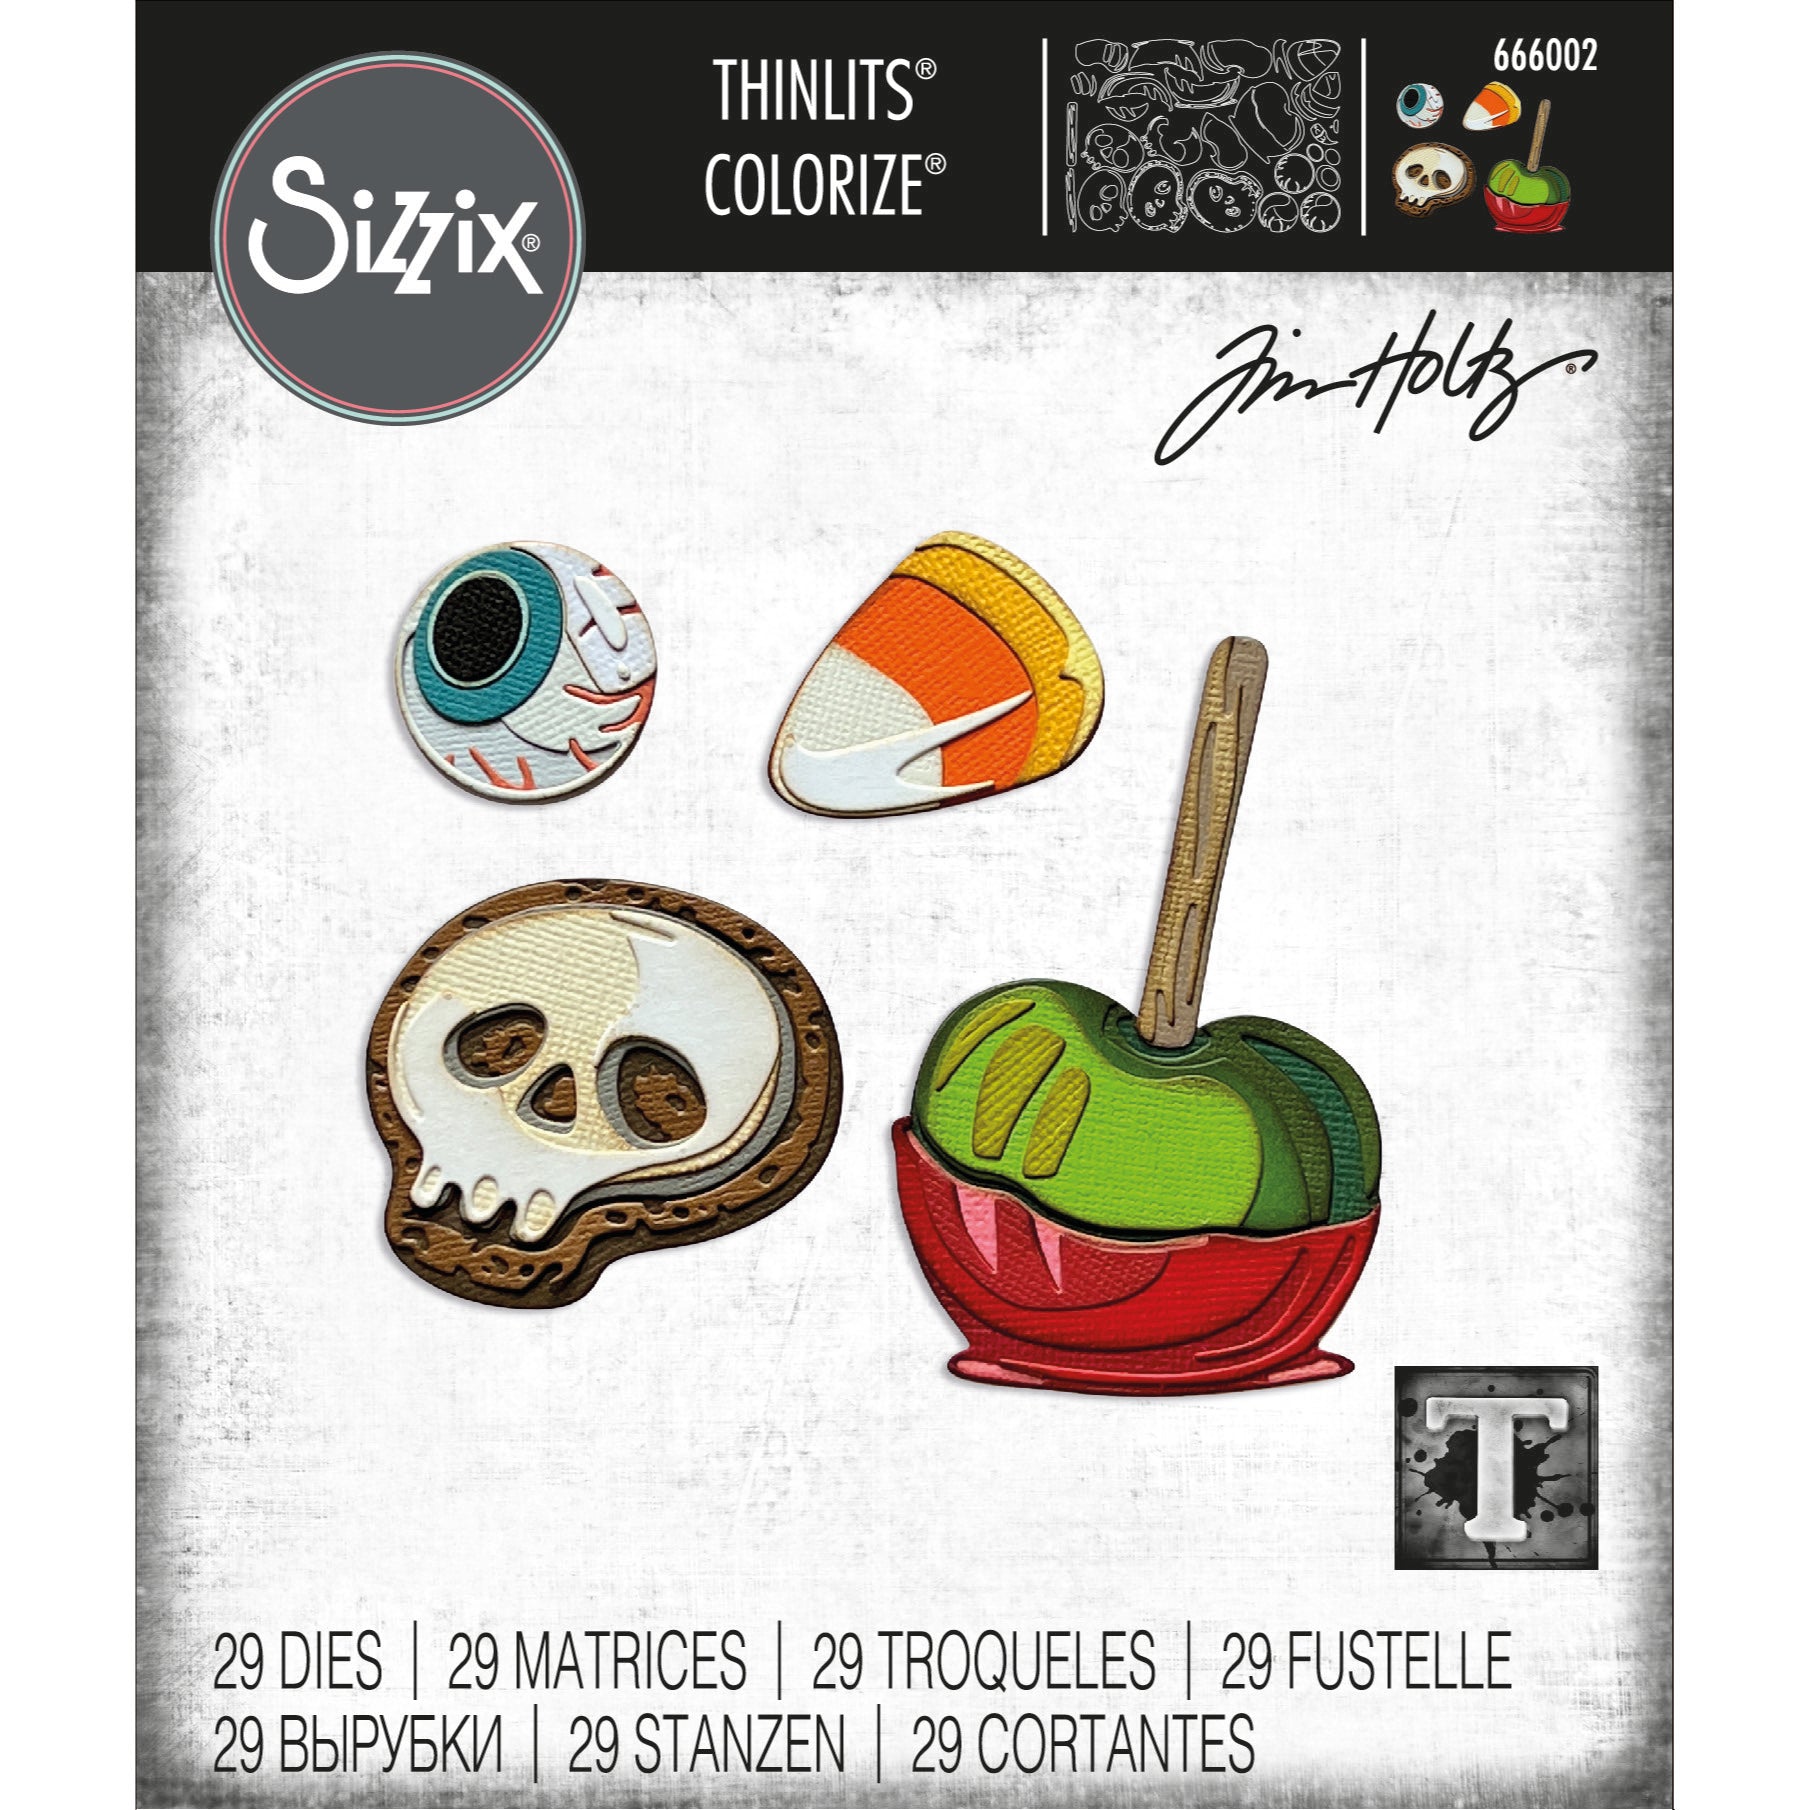 Sizzix Thinlits Die Set: Trick or Treat Colorize, by Tim Holtz (666002)